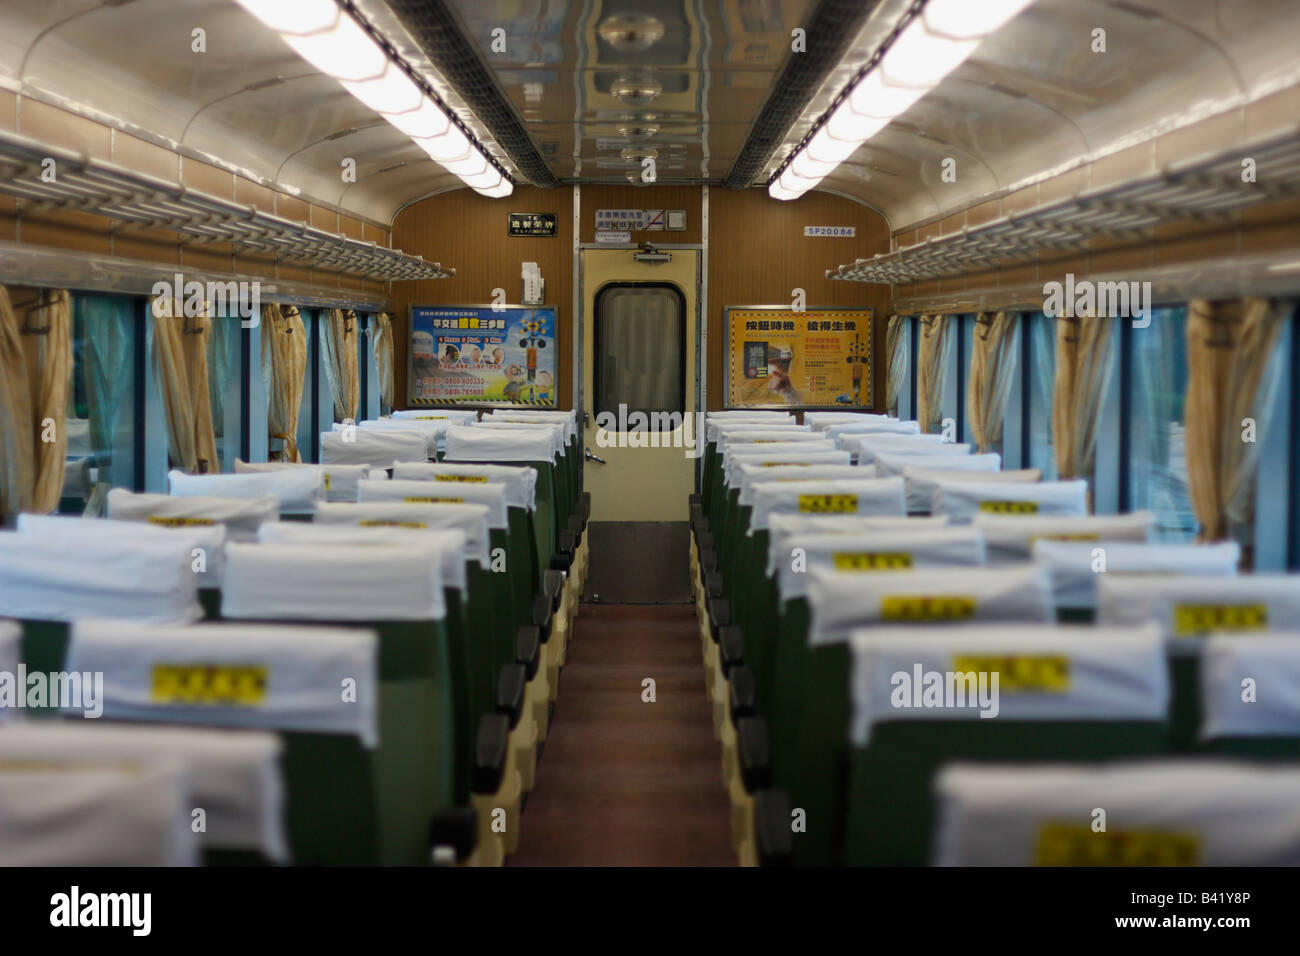 Interior of an empty train carriage in Taiwan Stock Photo